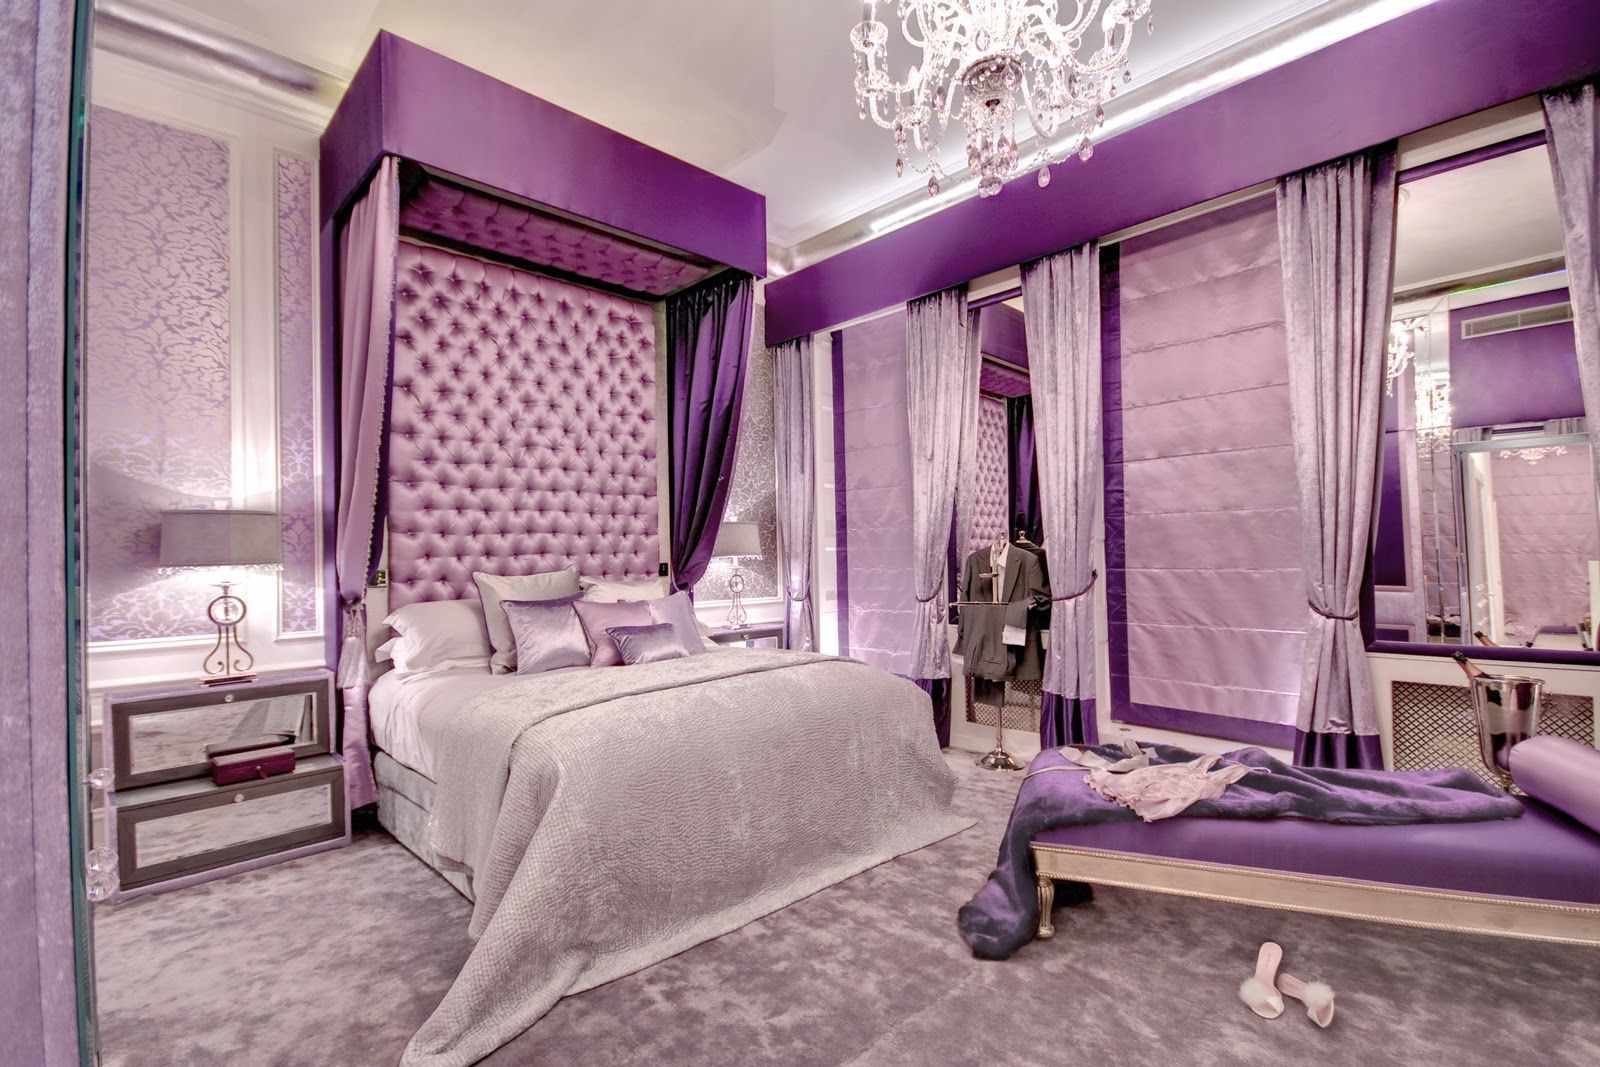 variant of a beautiful bedroom style